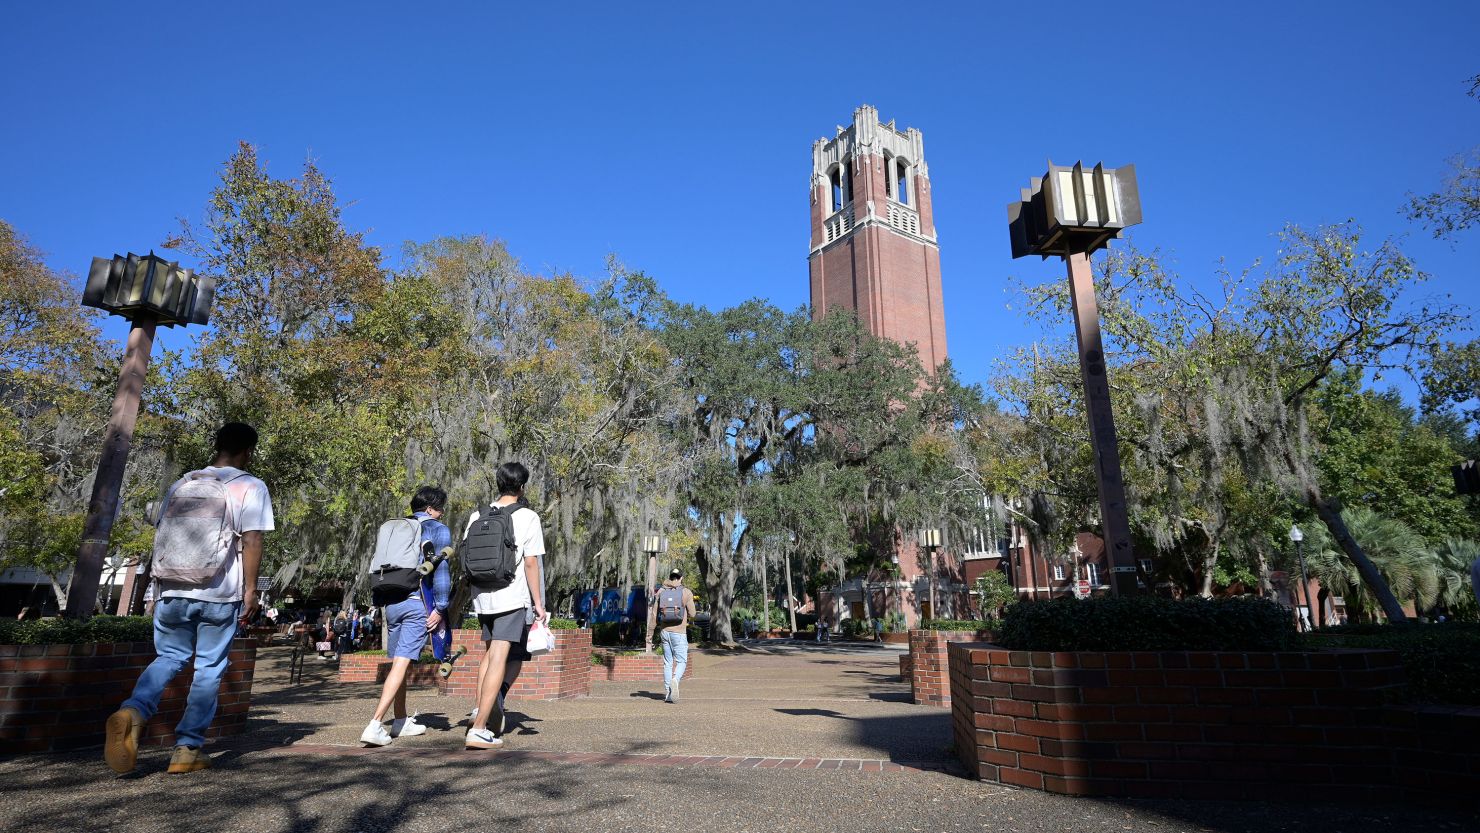 Students walk through the University of Florida campus on the last day of regular classes.